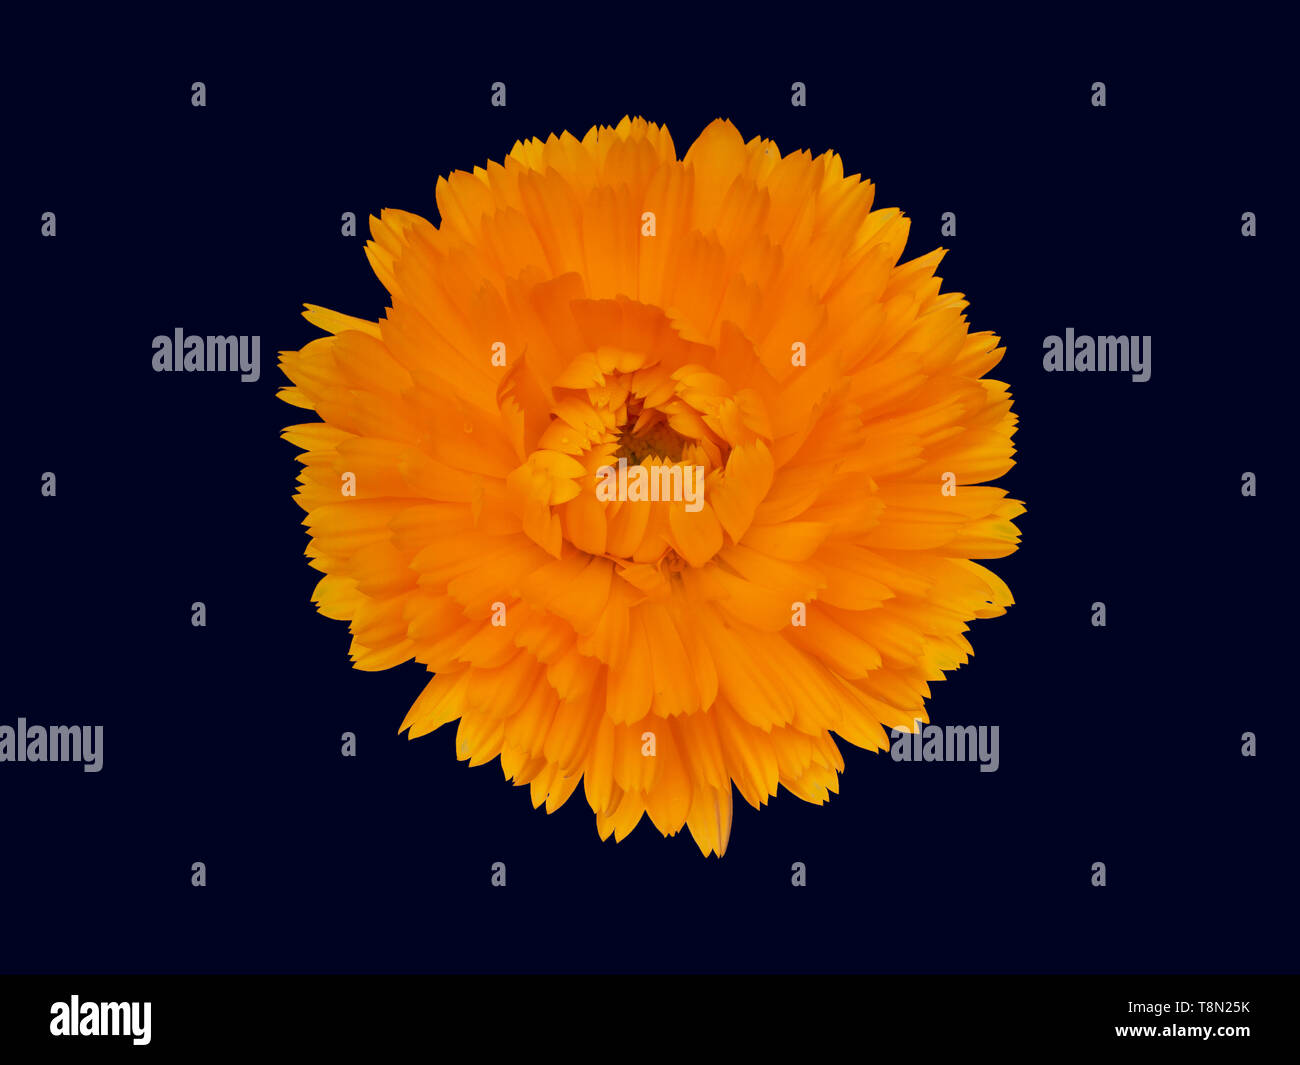 Marigold flower, Calendula officinalis, isolated on deep blue background. Edible medicinal herb. Stock Photo